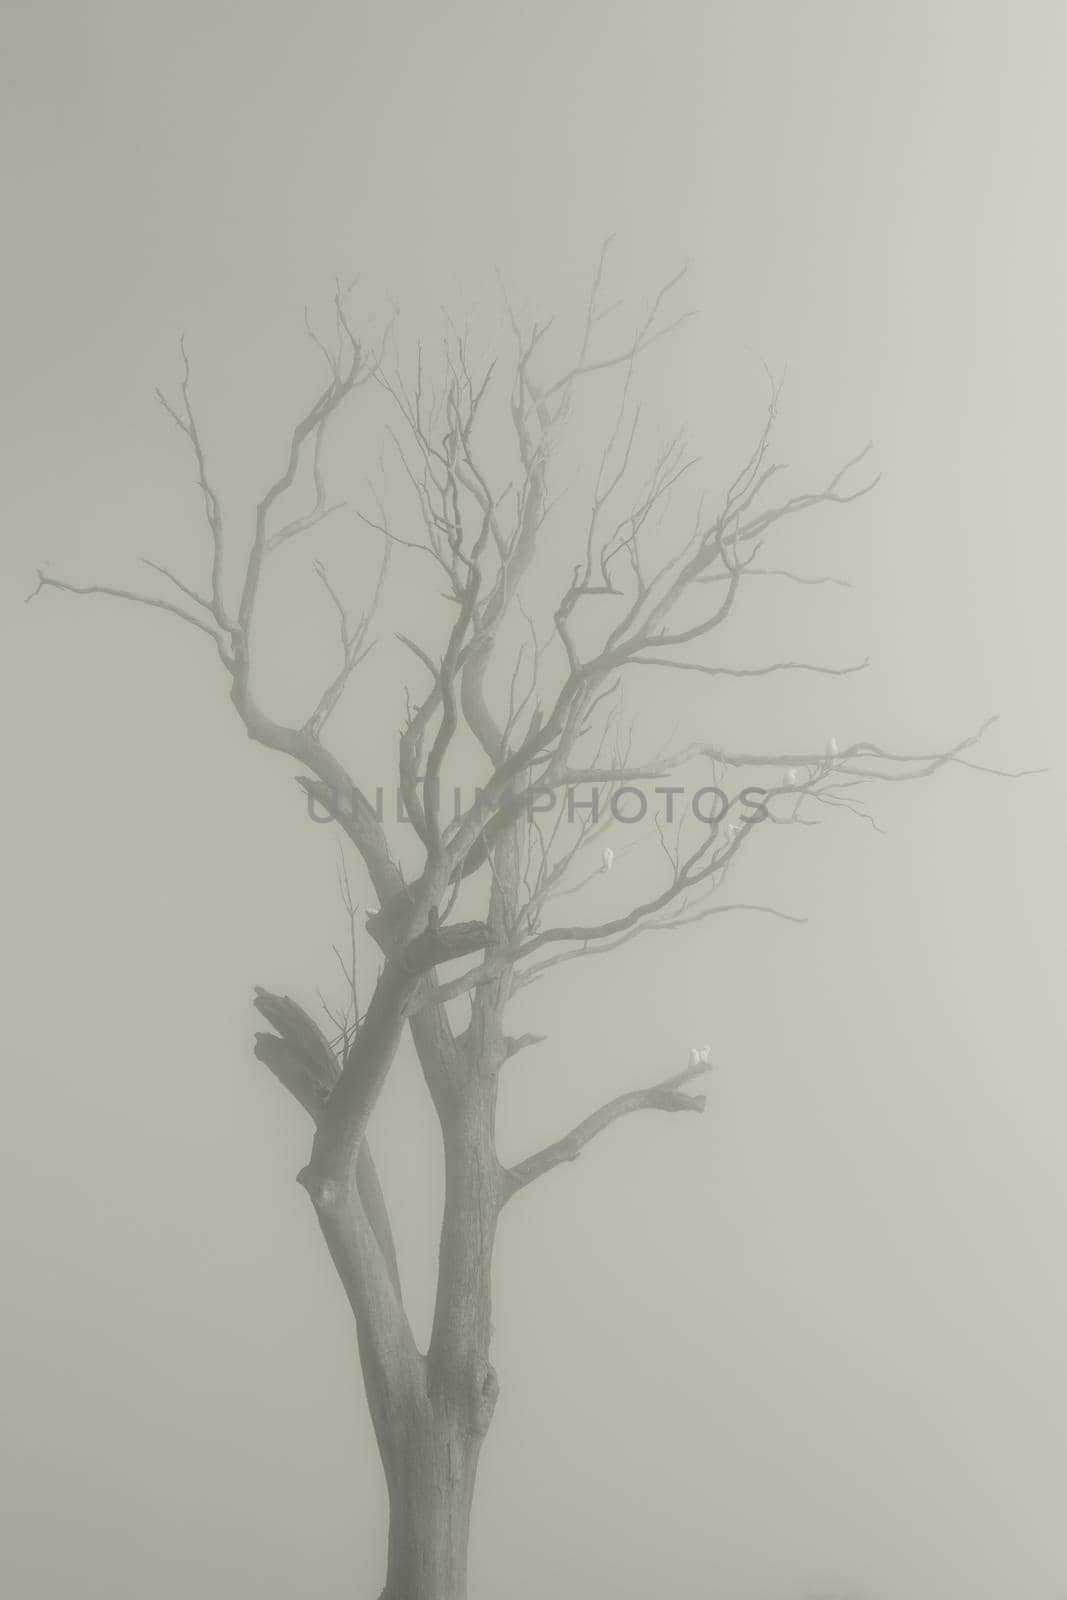 Sulphur Crest Cockatoos in a tree in the fog in Australia by WittkePhotos